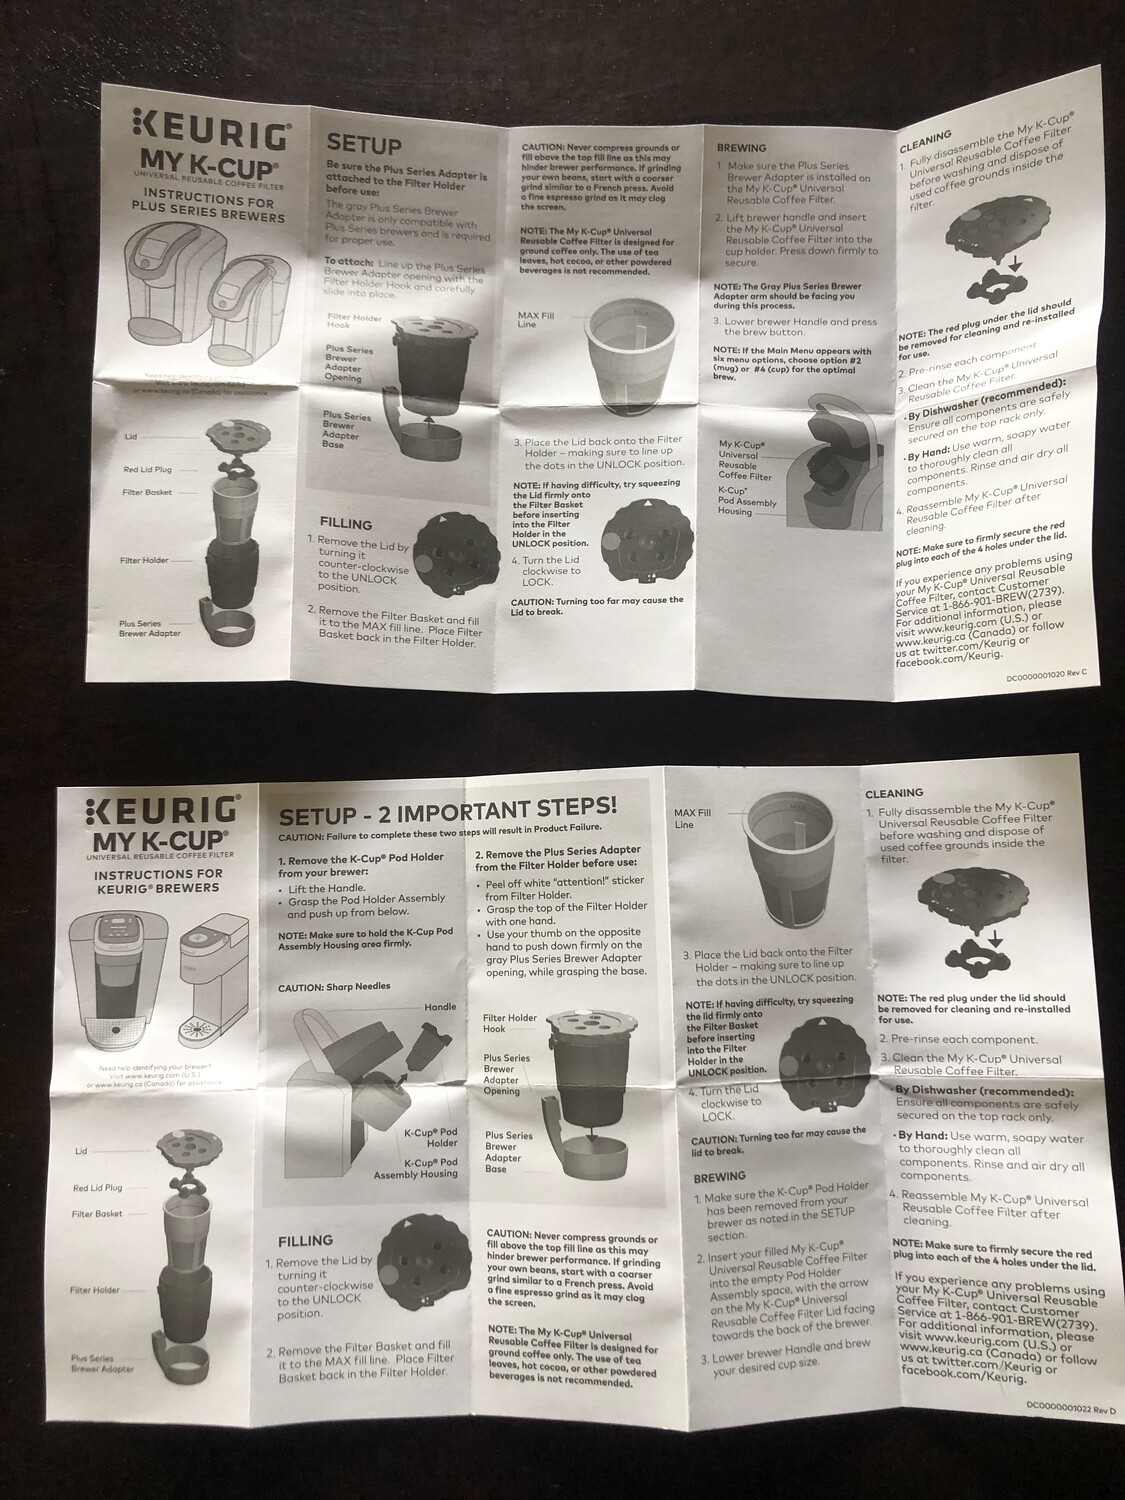 The multi-version instructions for a 20-cent cup of coffee